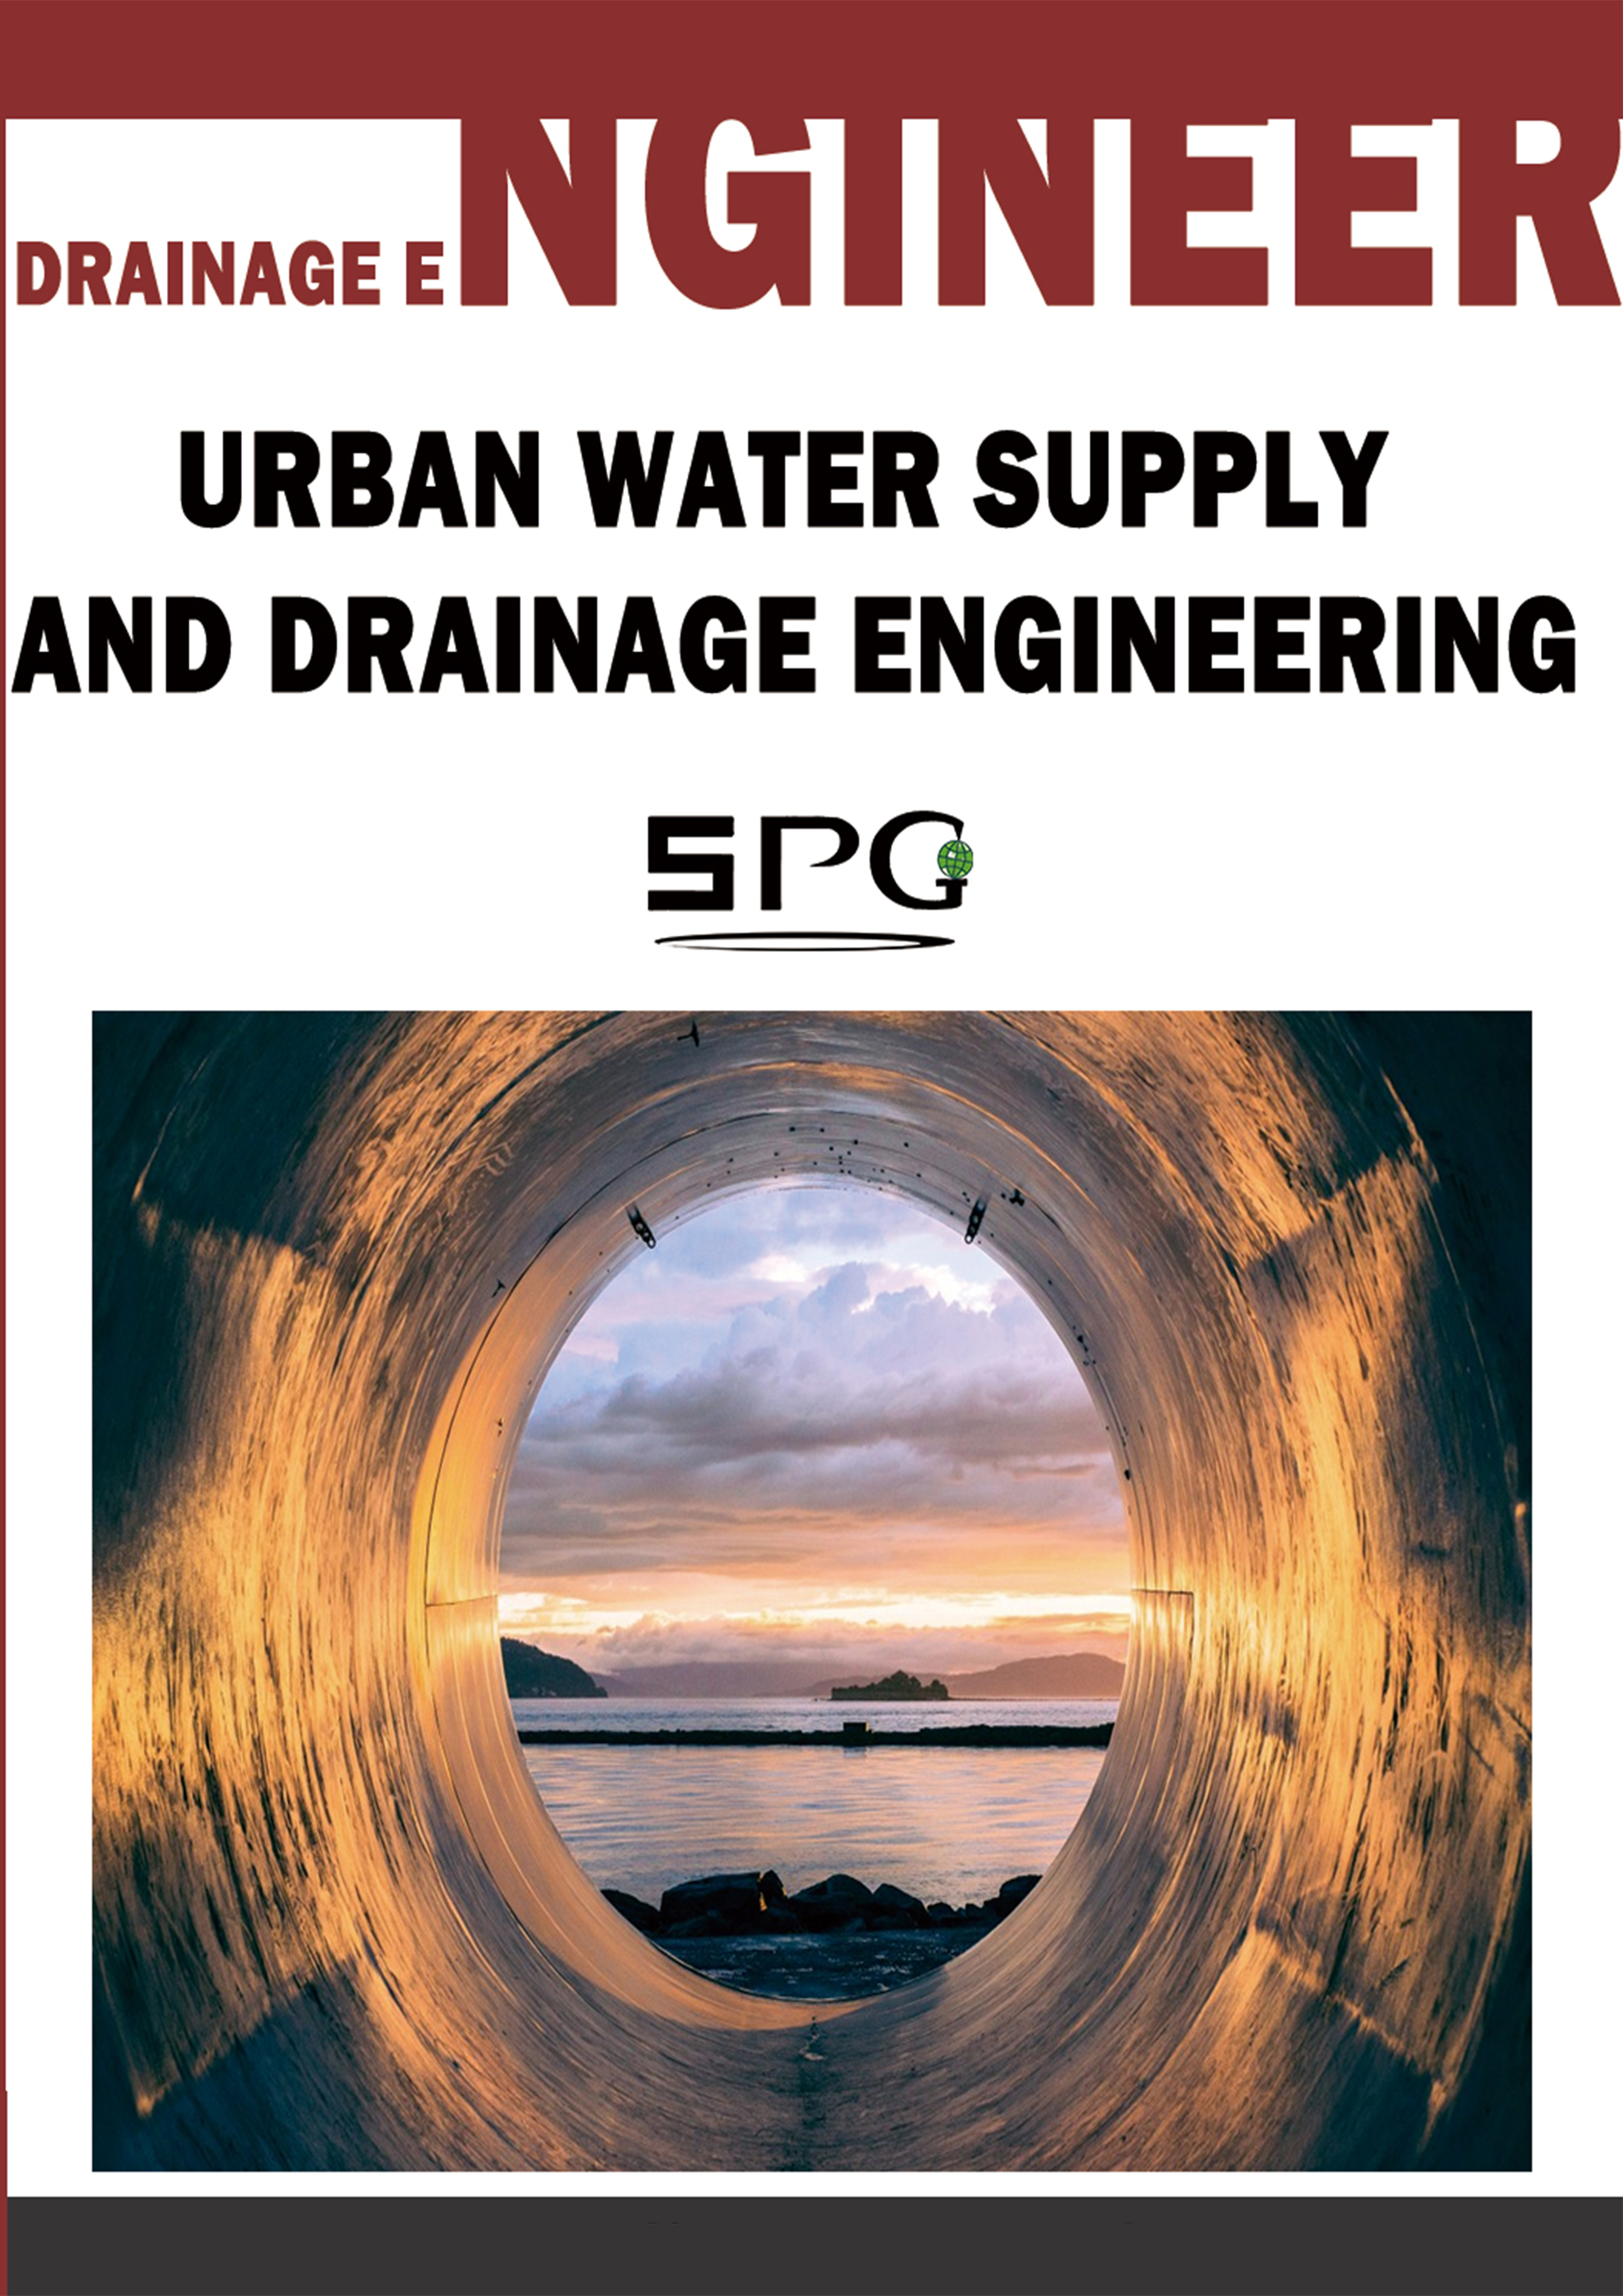 Urban Water Supply and Drainage Engineering | Scholar Publishing Group